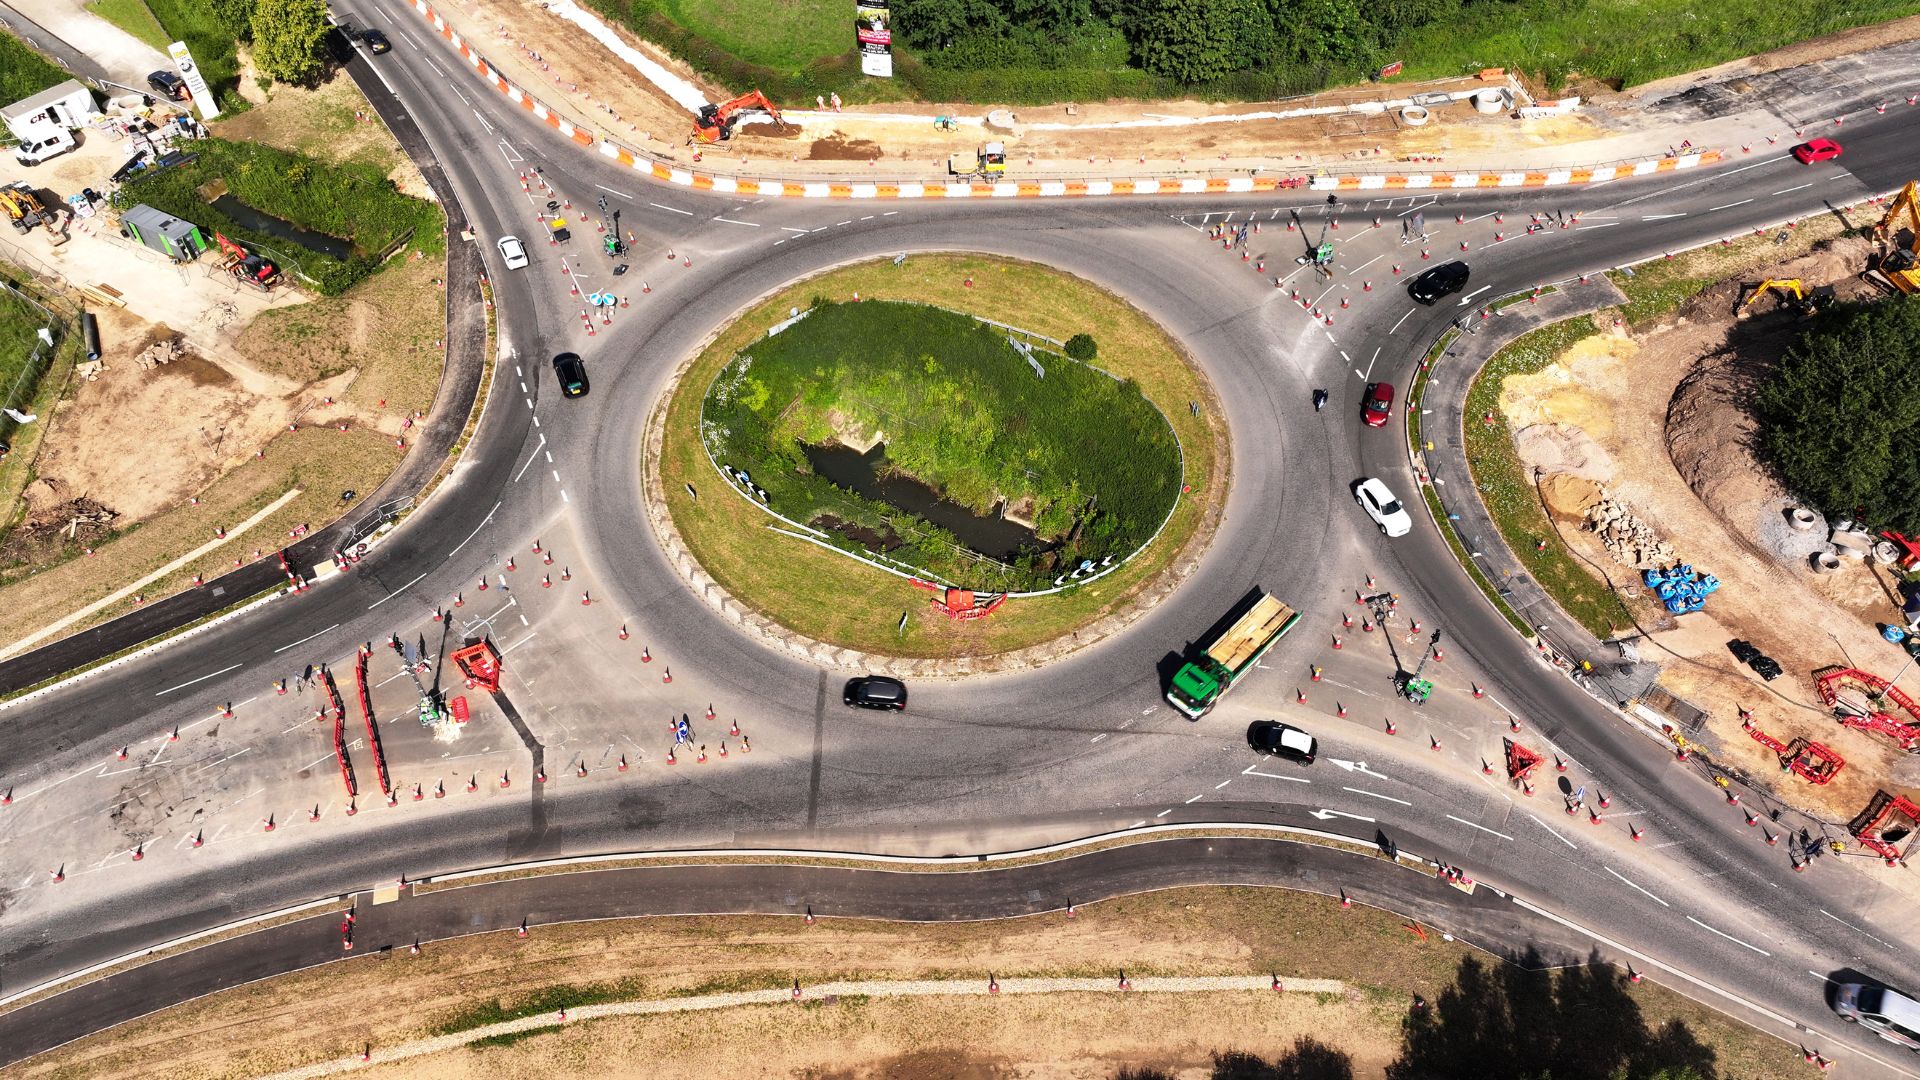 An overhead view of the Springfield Roundabout